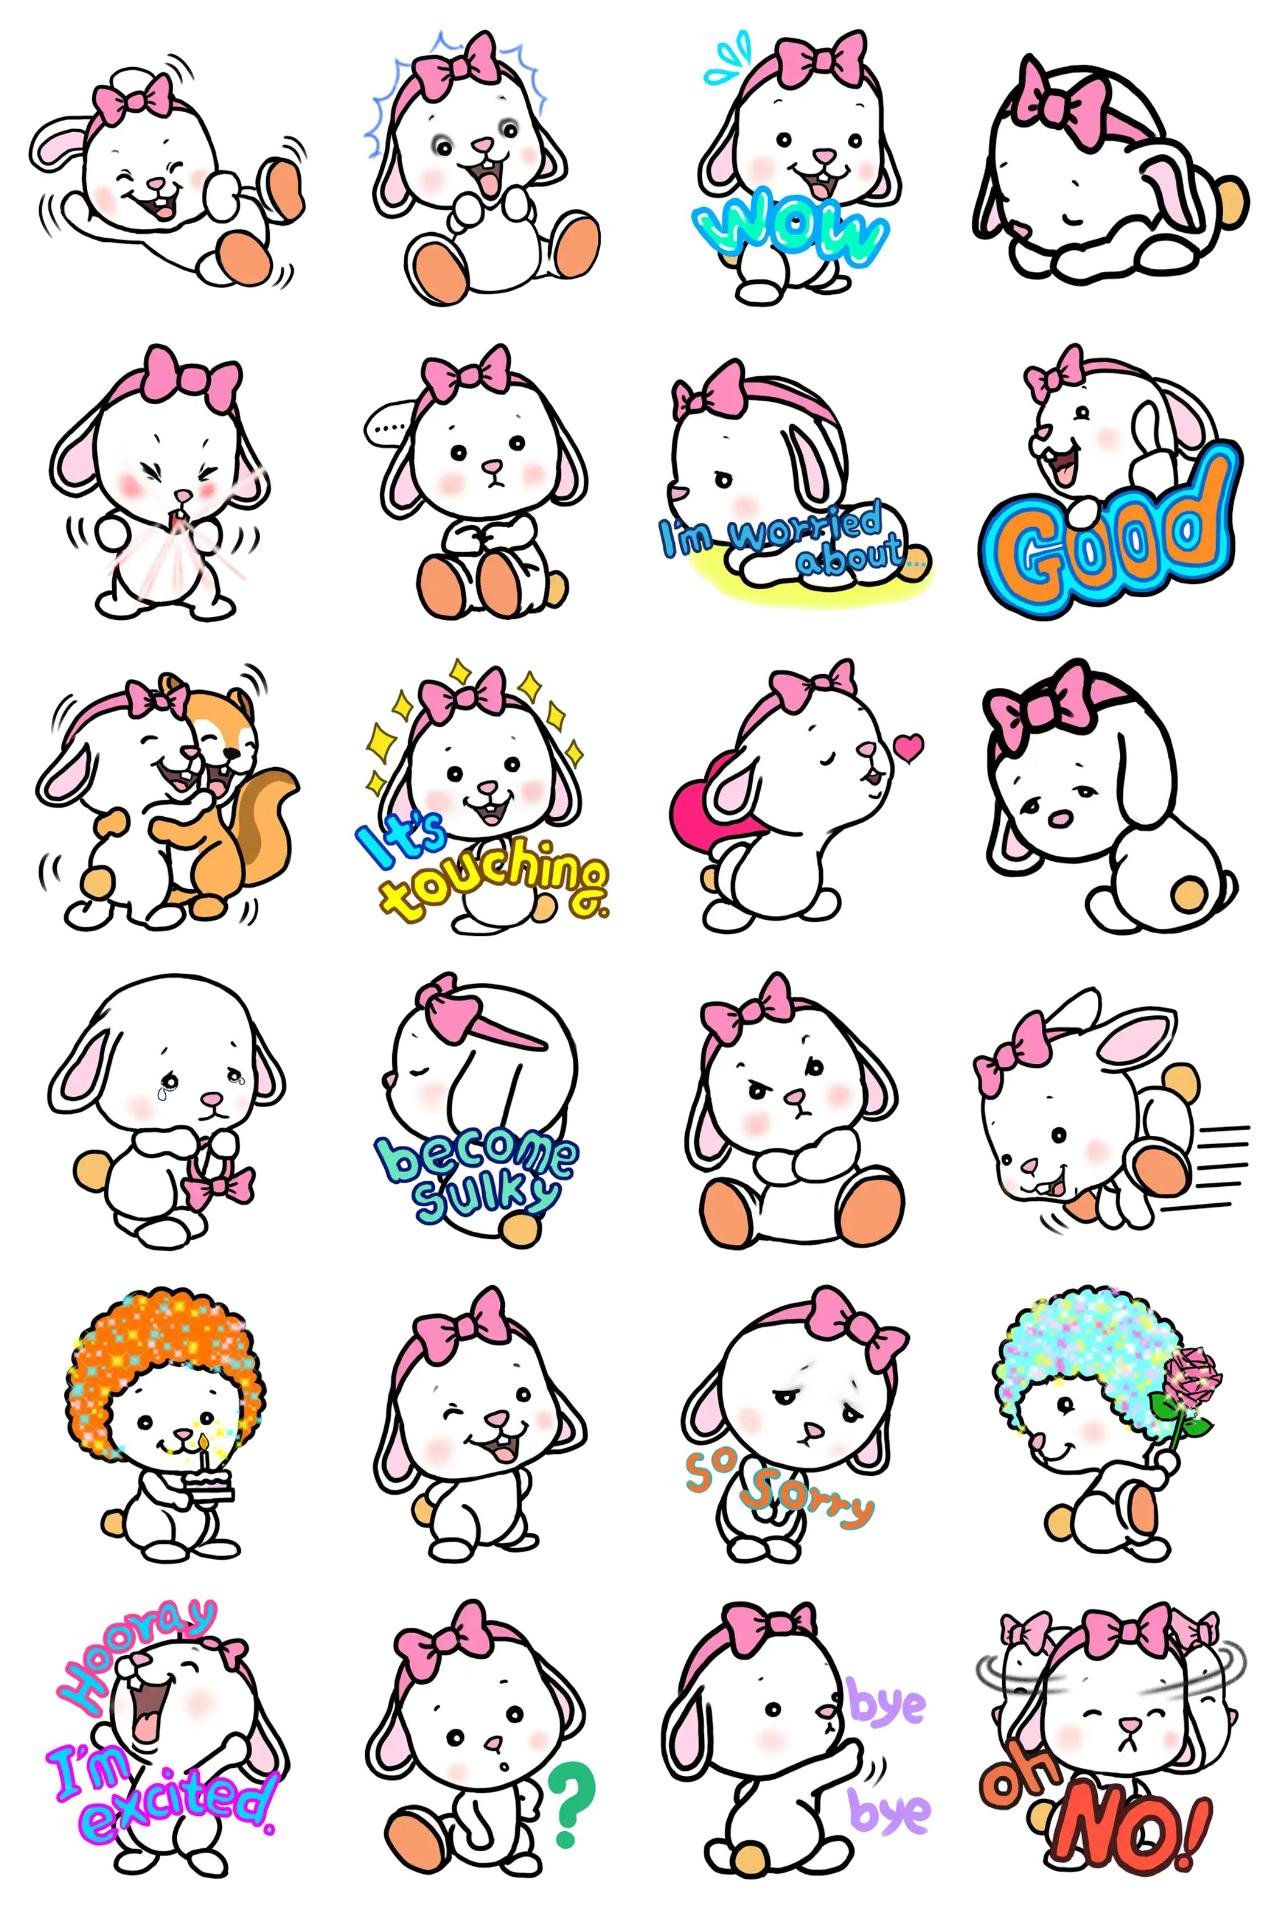 Baby Rabbit Tobi Animals sticker pack for Whatsapp, Telegram, Signal, and others chatting and message apps